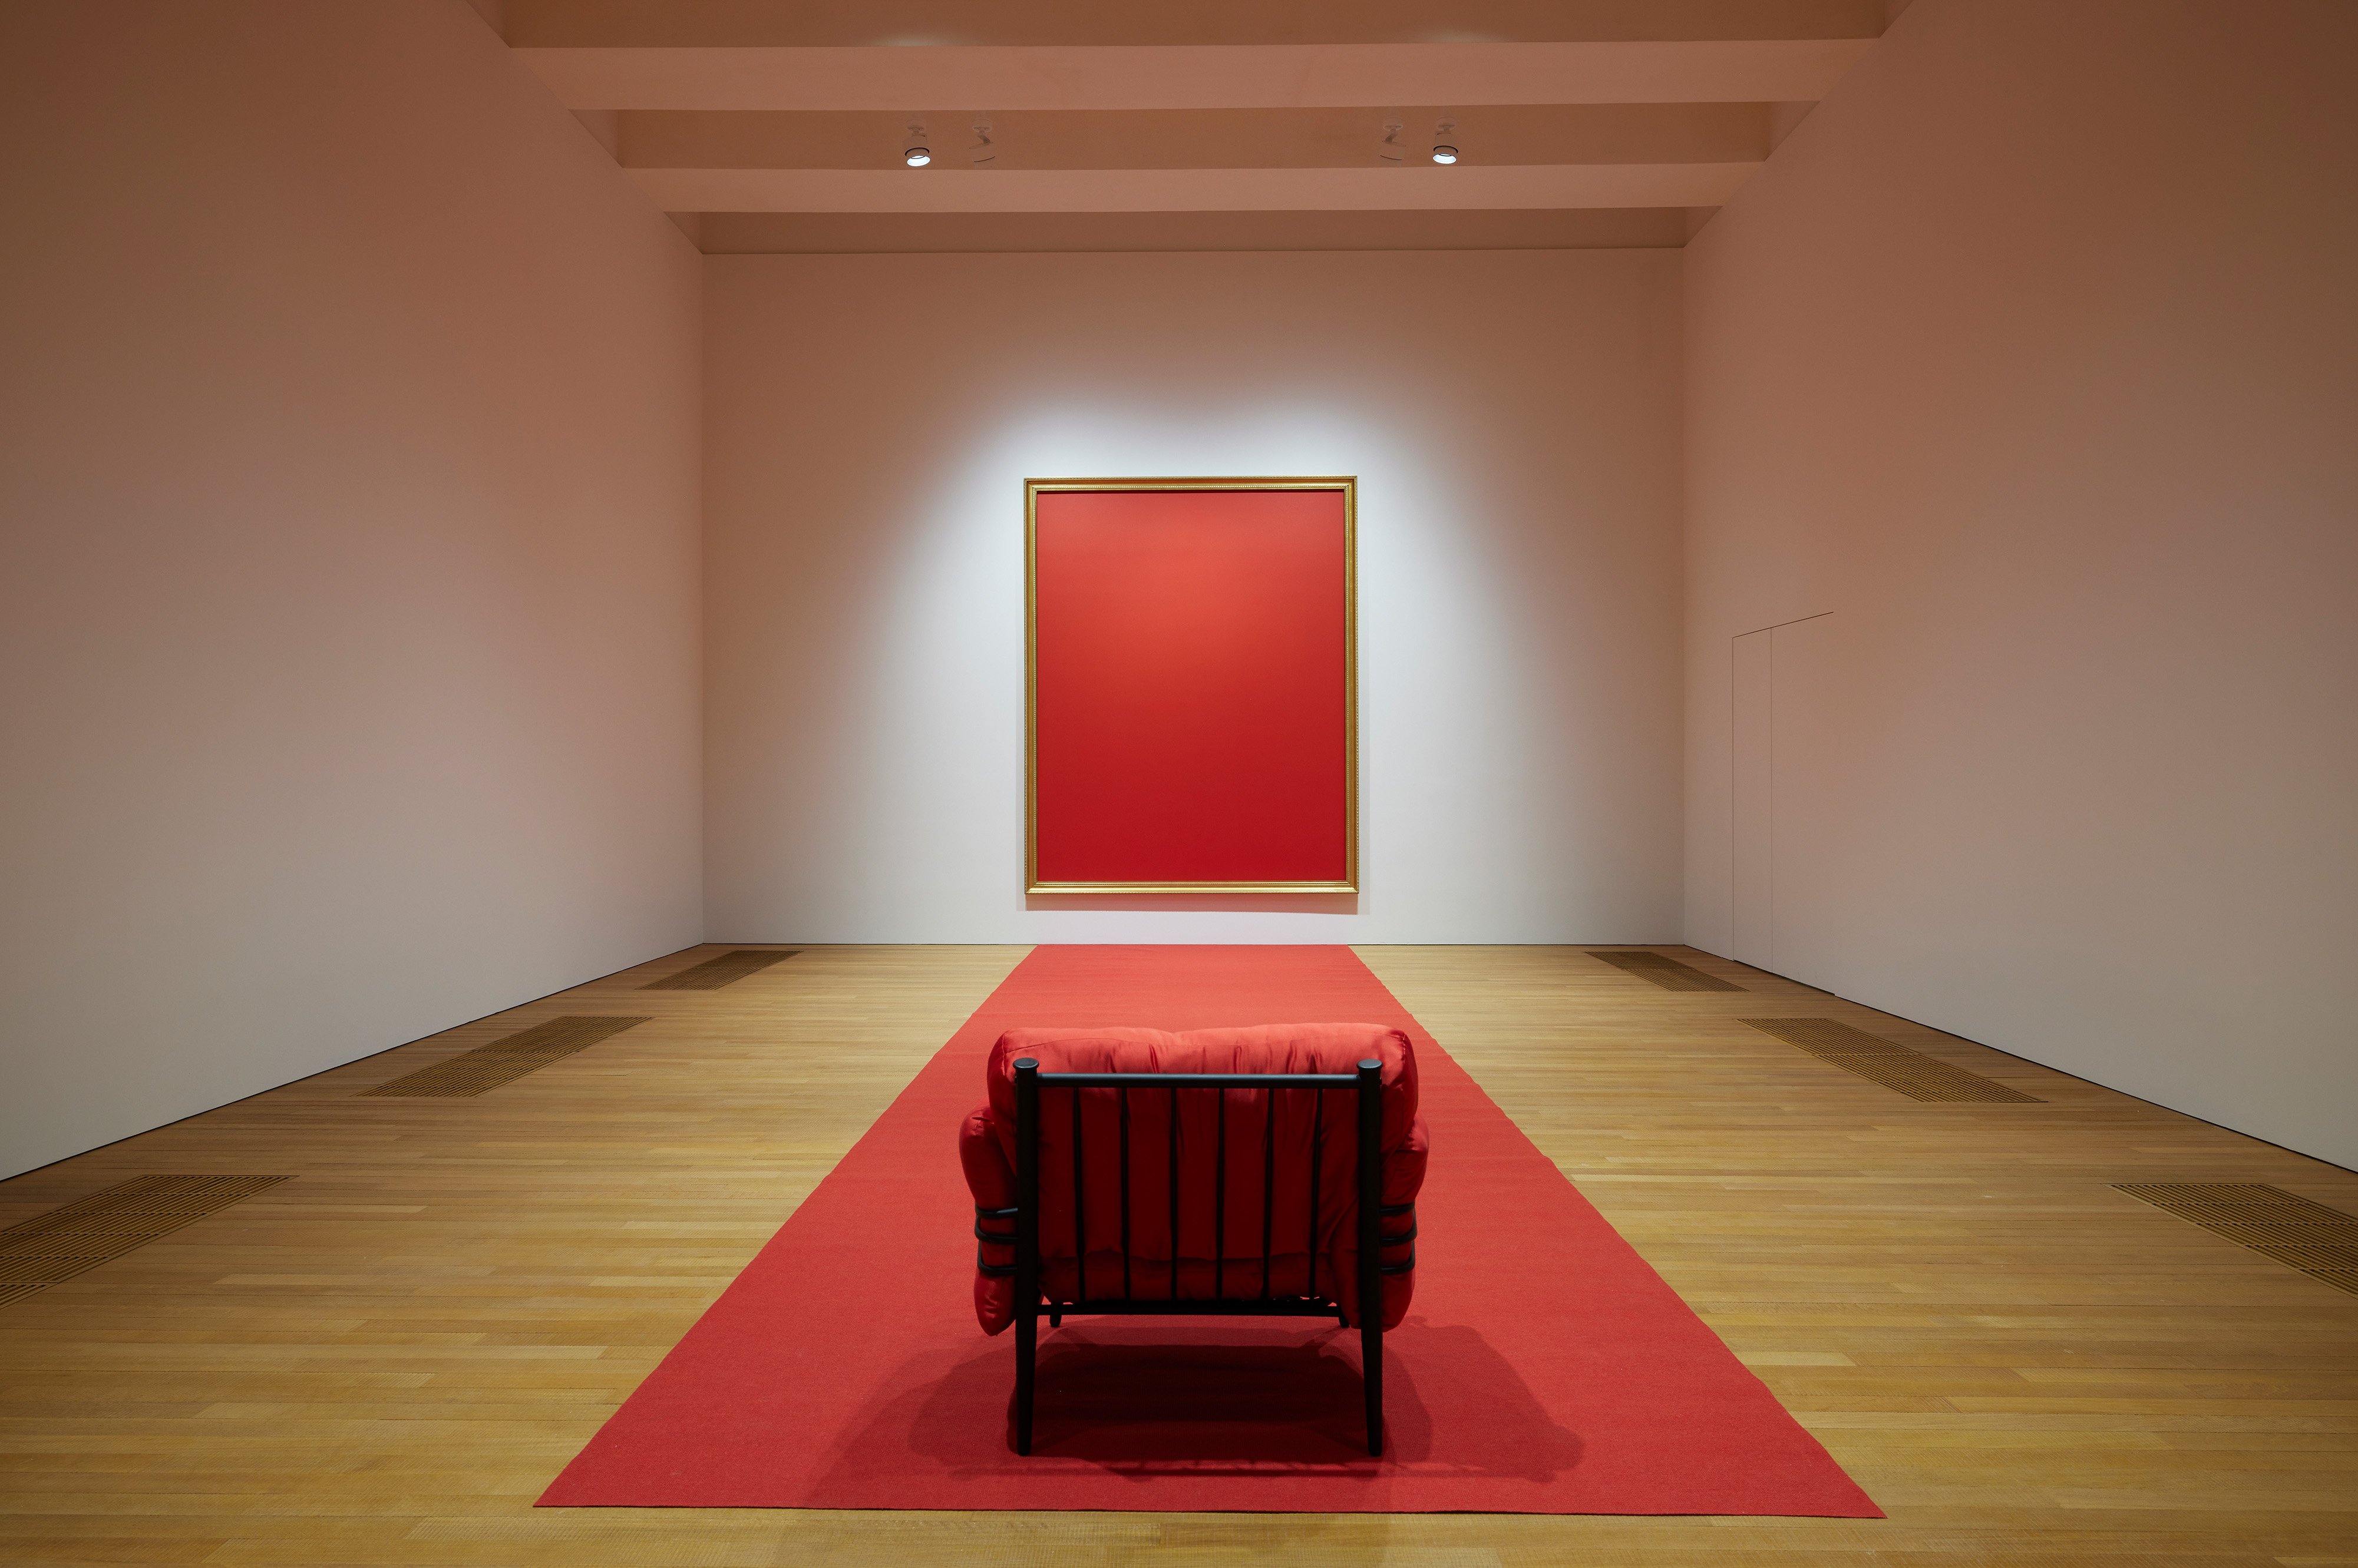 In a white-walled gallery with wooden flooring, a red-cushioned chair is placed facing the rear wall at the edge of a long red carpet. The carpet extends towards the rear wall, where a red painting in gilded frame is hung.